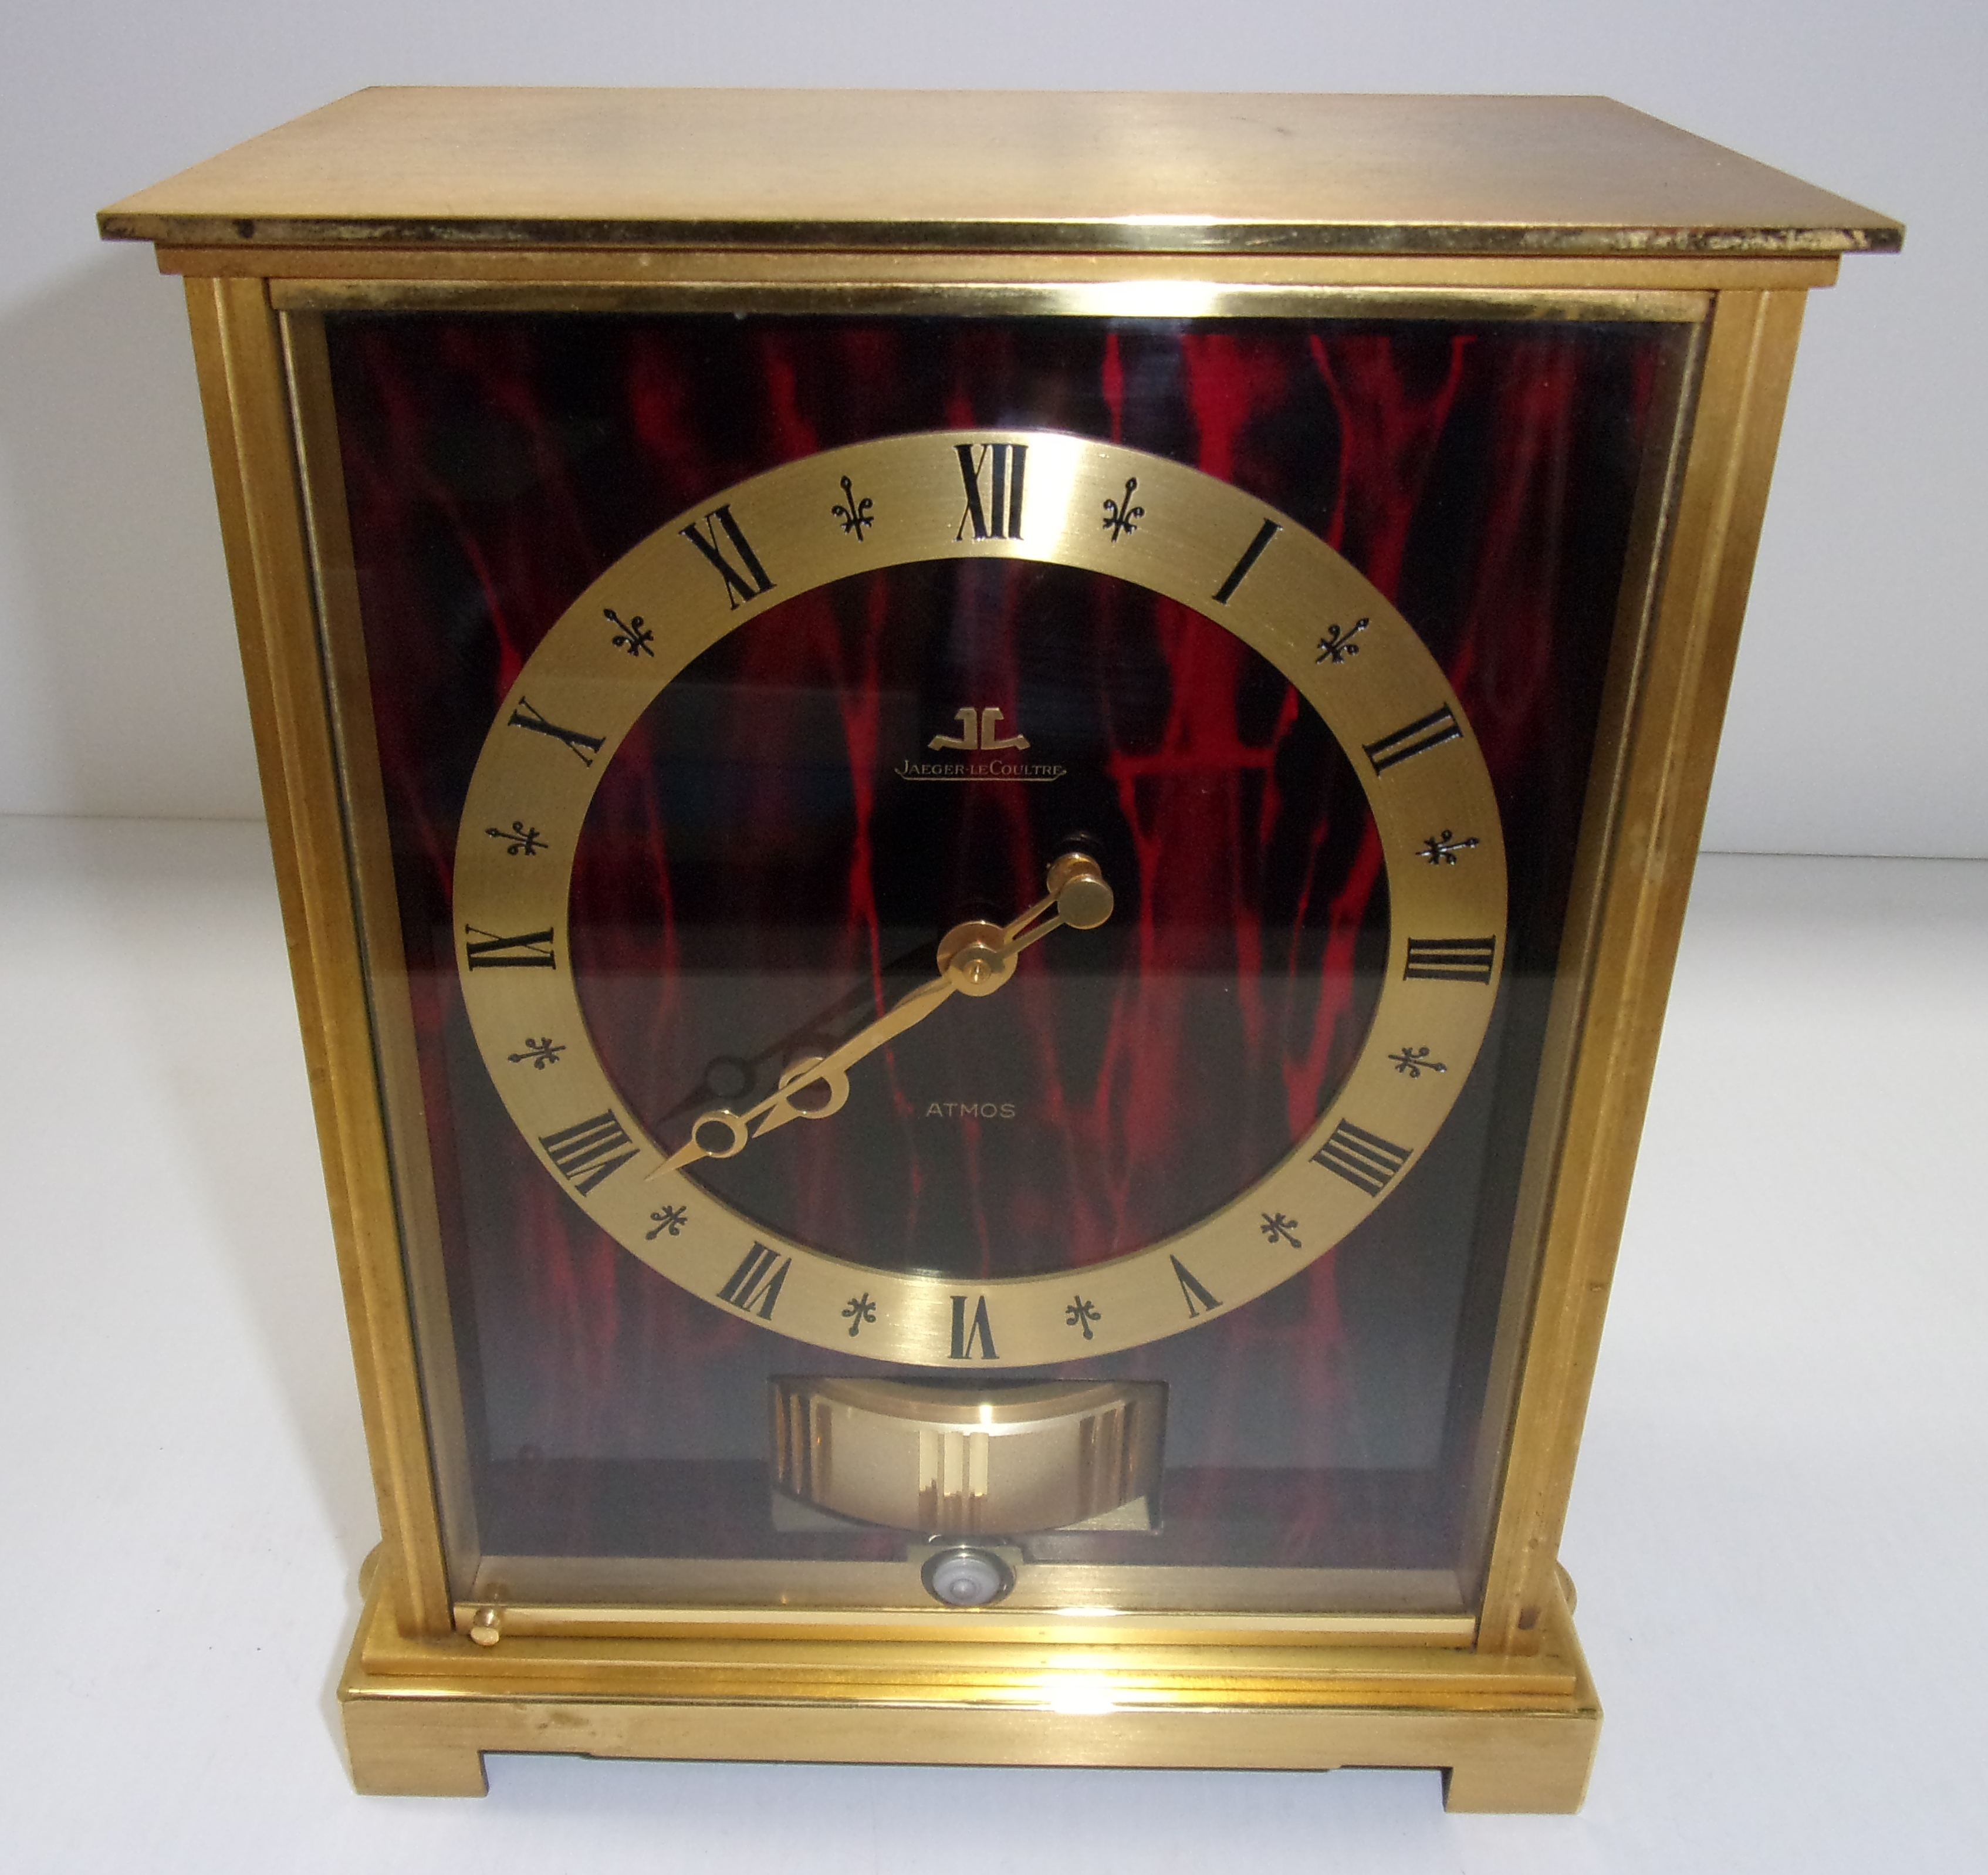 A Jaeger-LeCoultre Atmos Embassy model clock in a brass framed case with simulated tortoiseshell